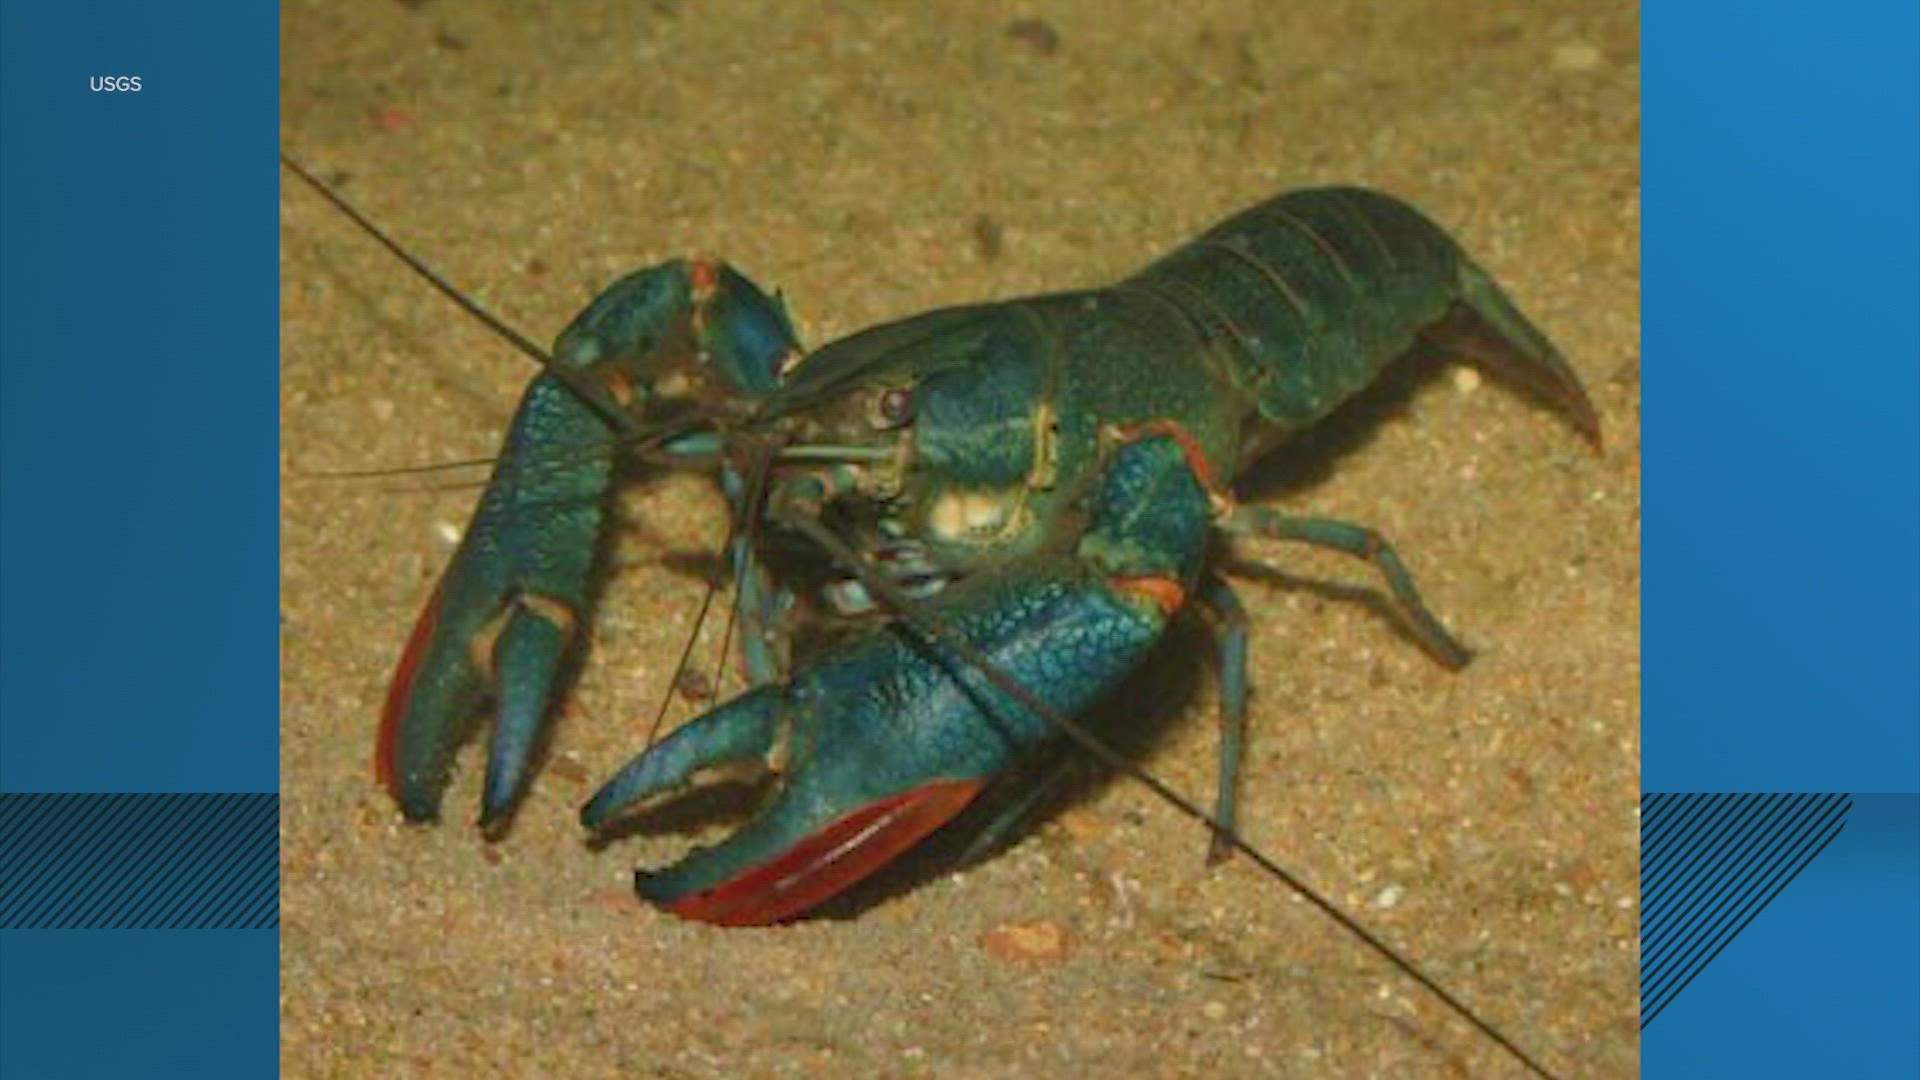 The lobster-sized crawfish has invaded the Lone Star State and apparently it tastes like lobster.